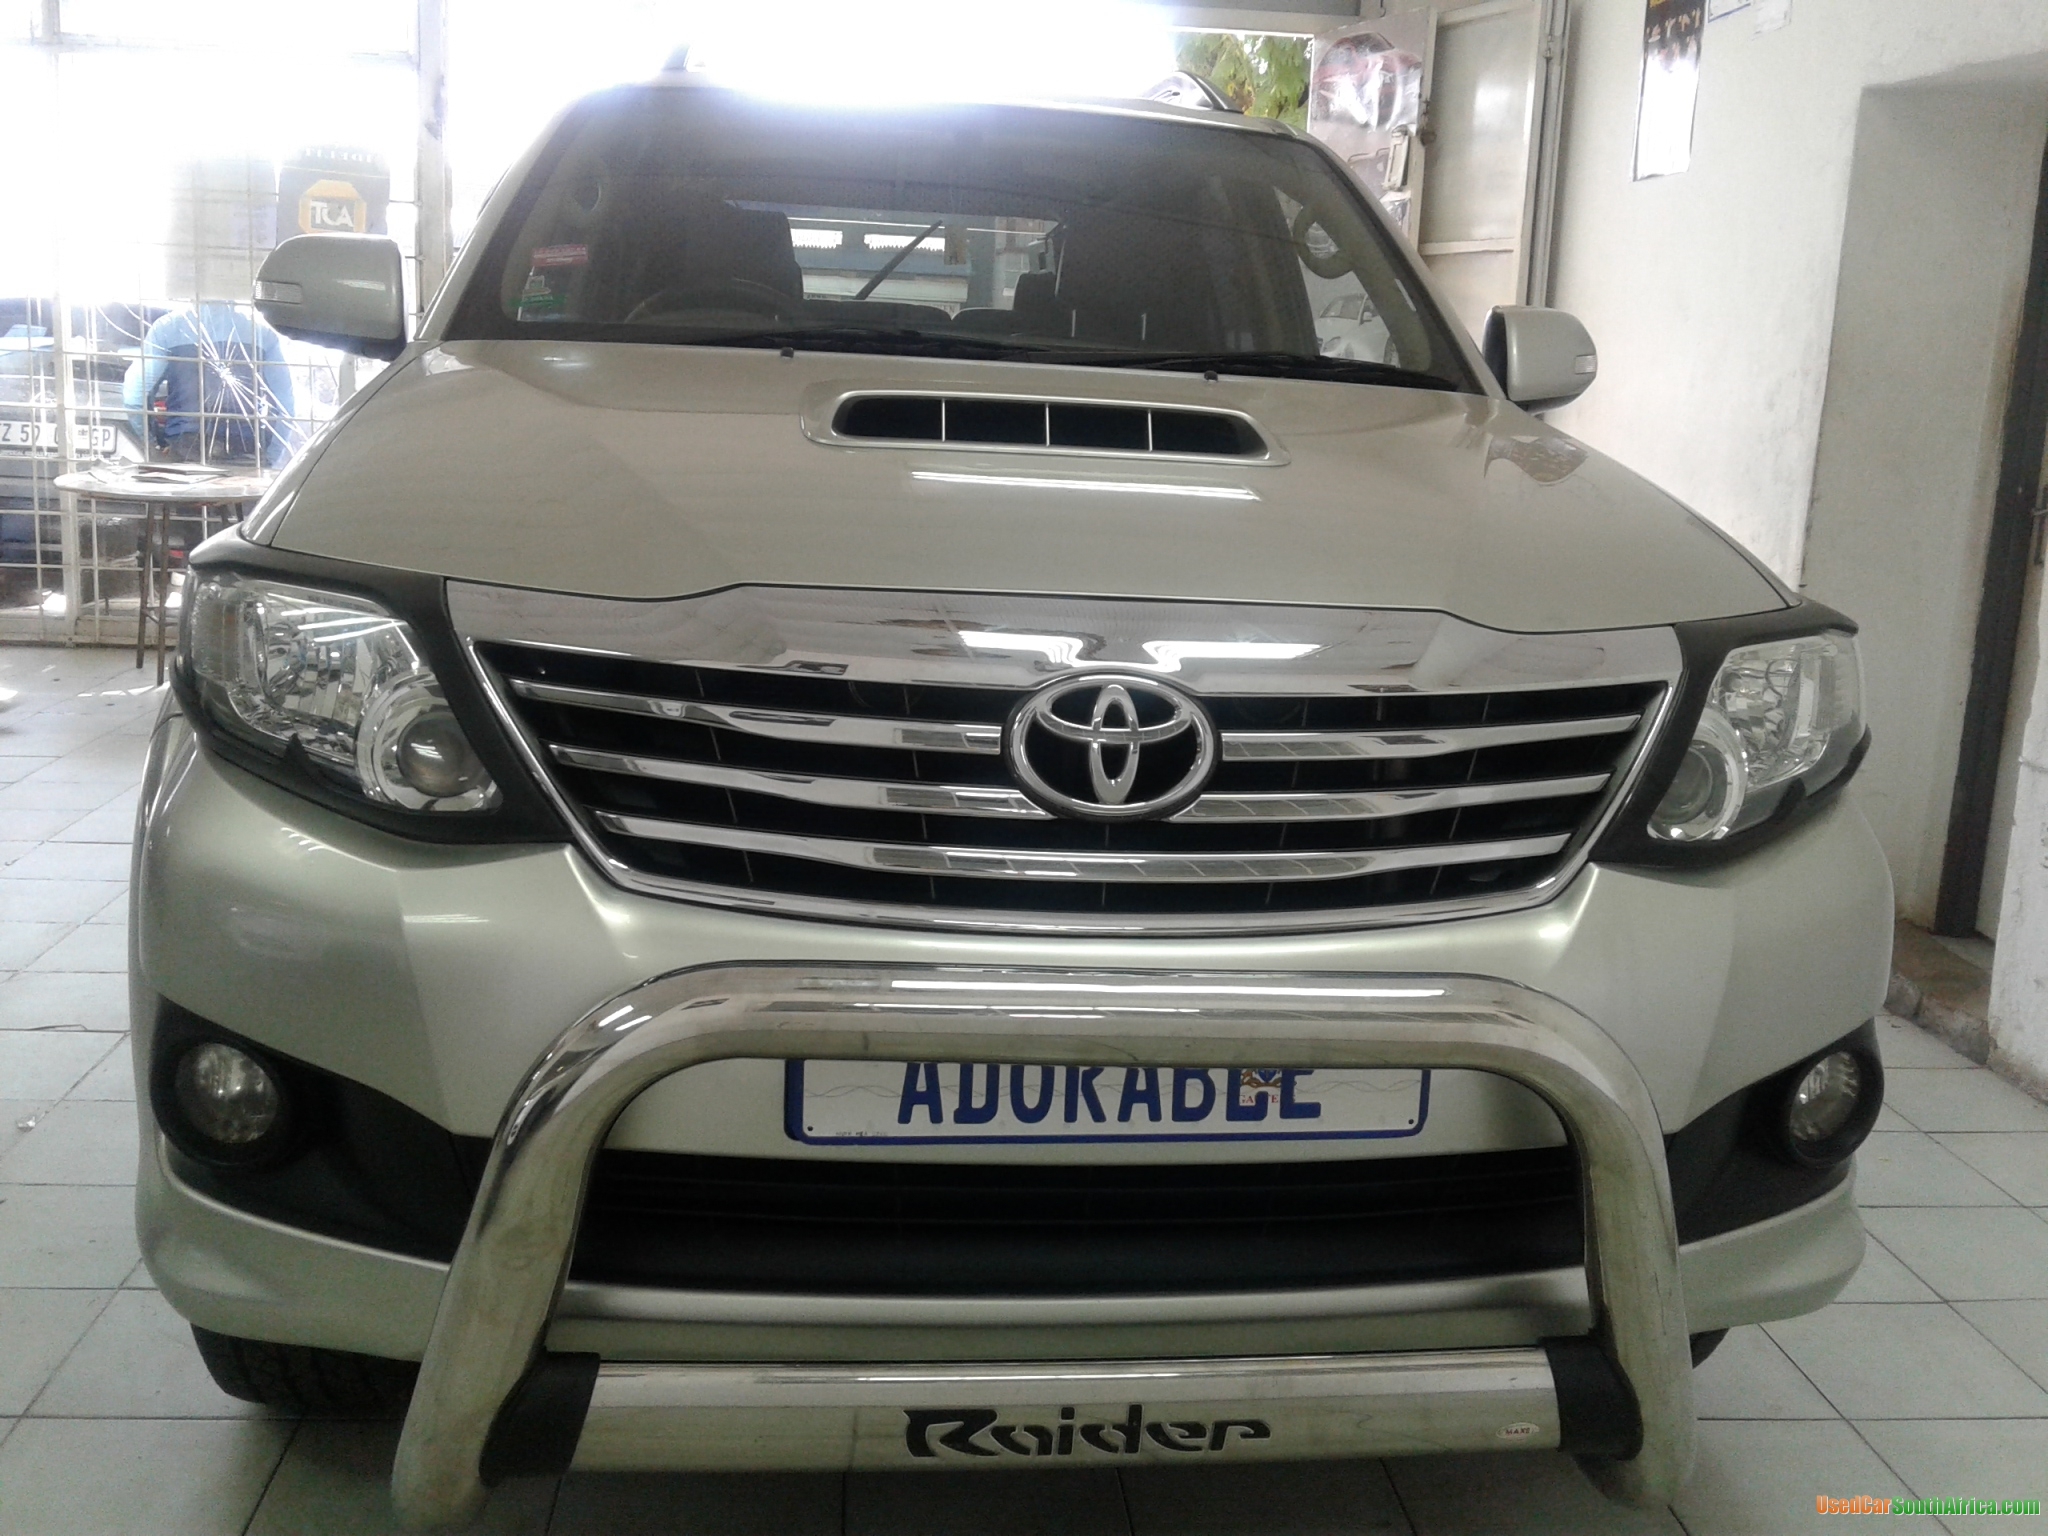 2013 Toyota Fortuner D-4D used car for sale in Johannesburg City ...